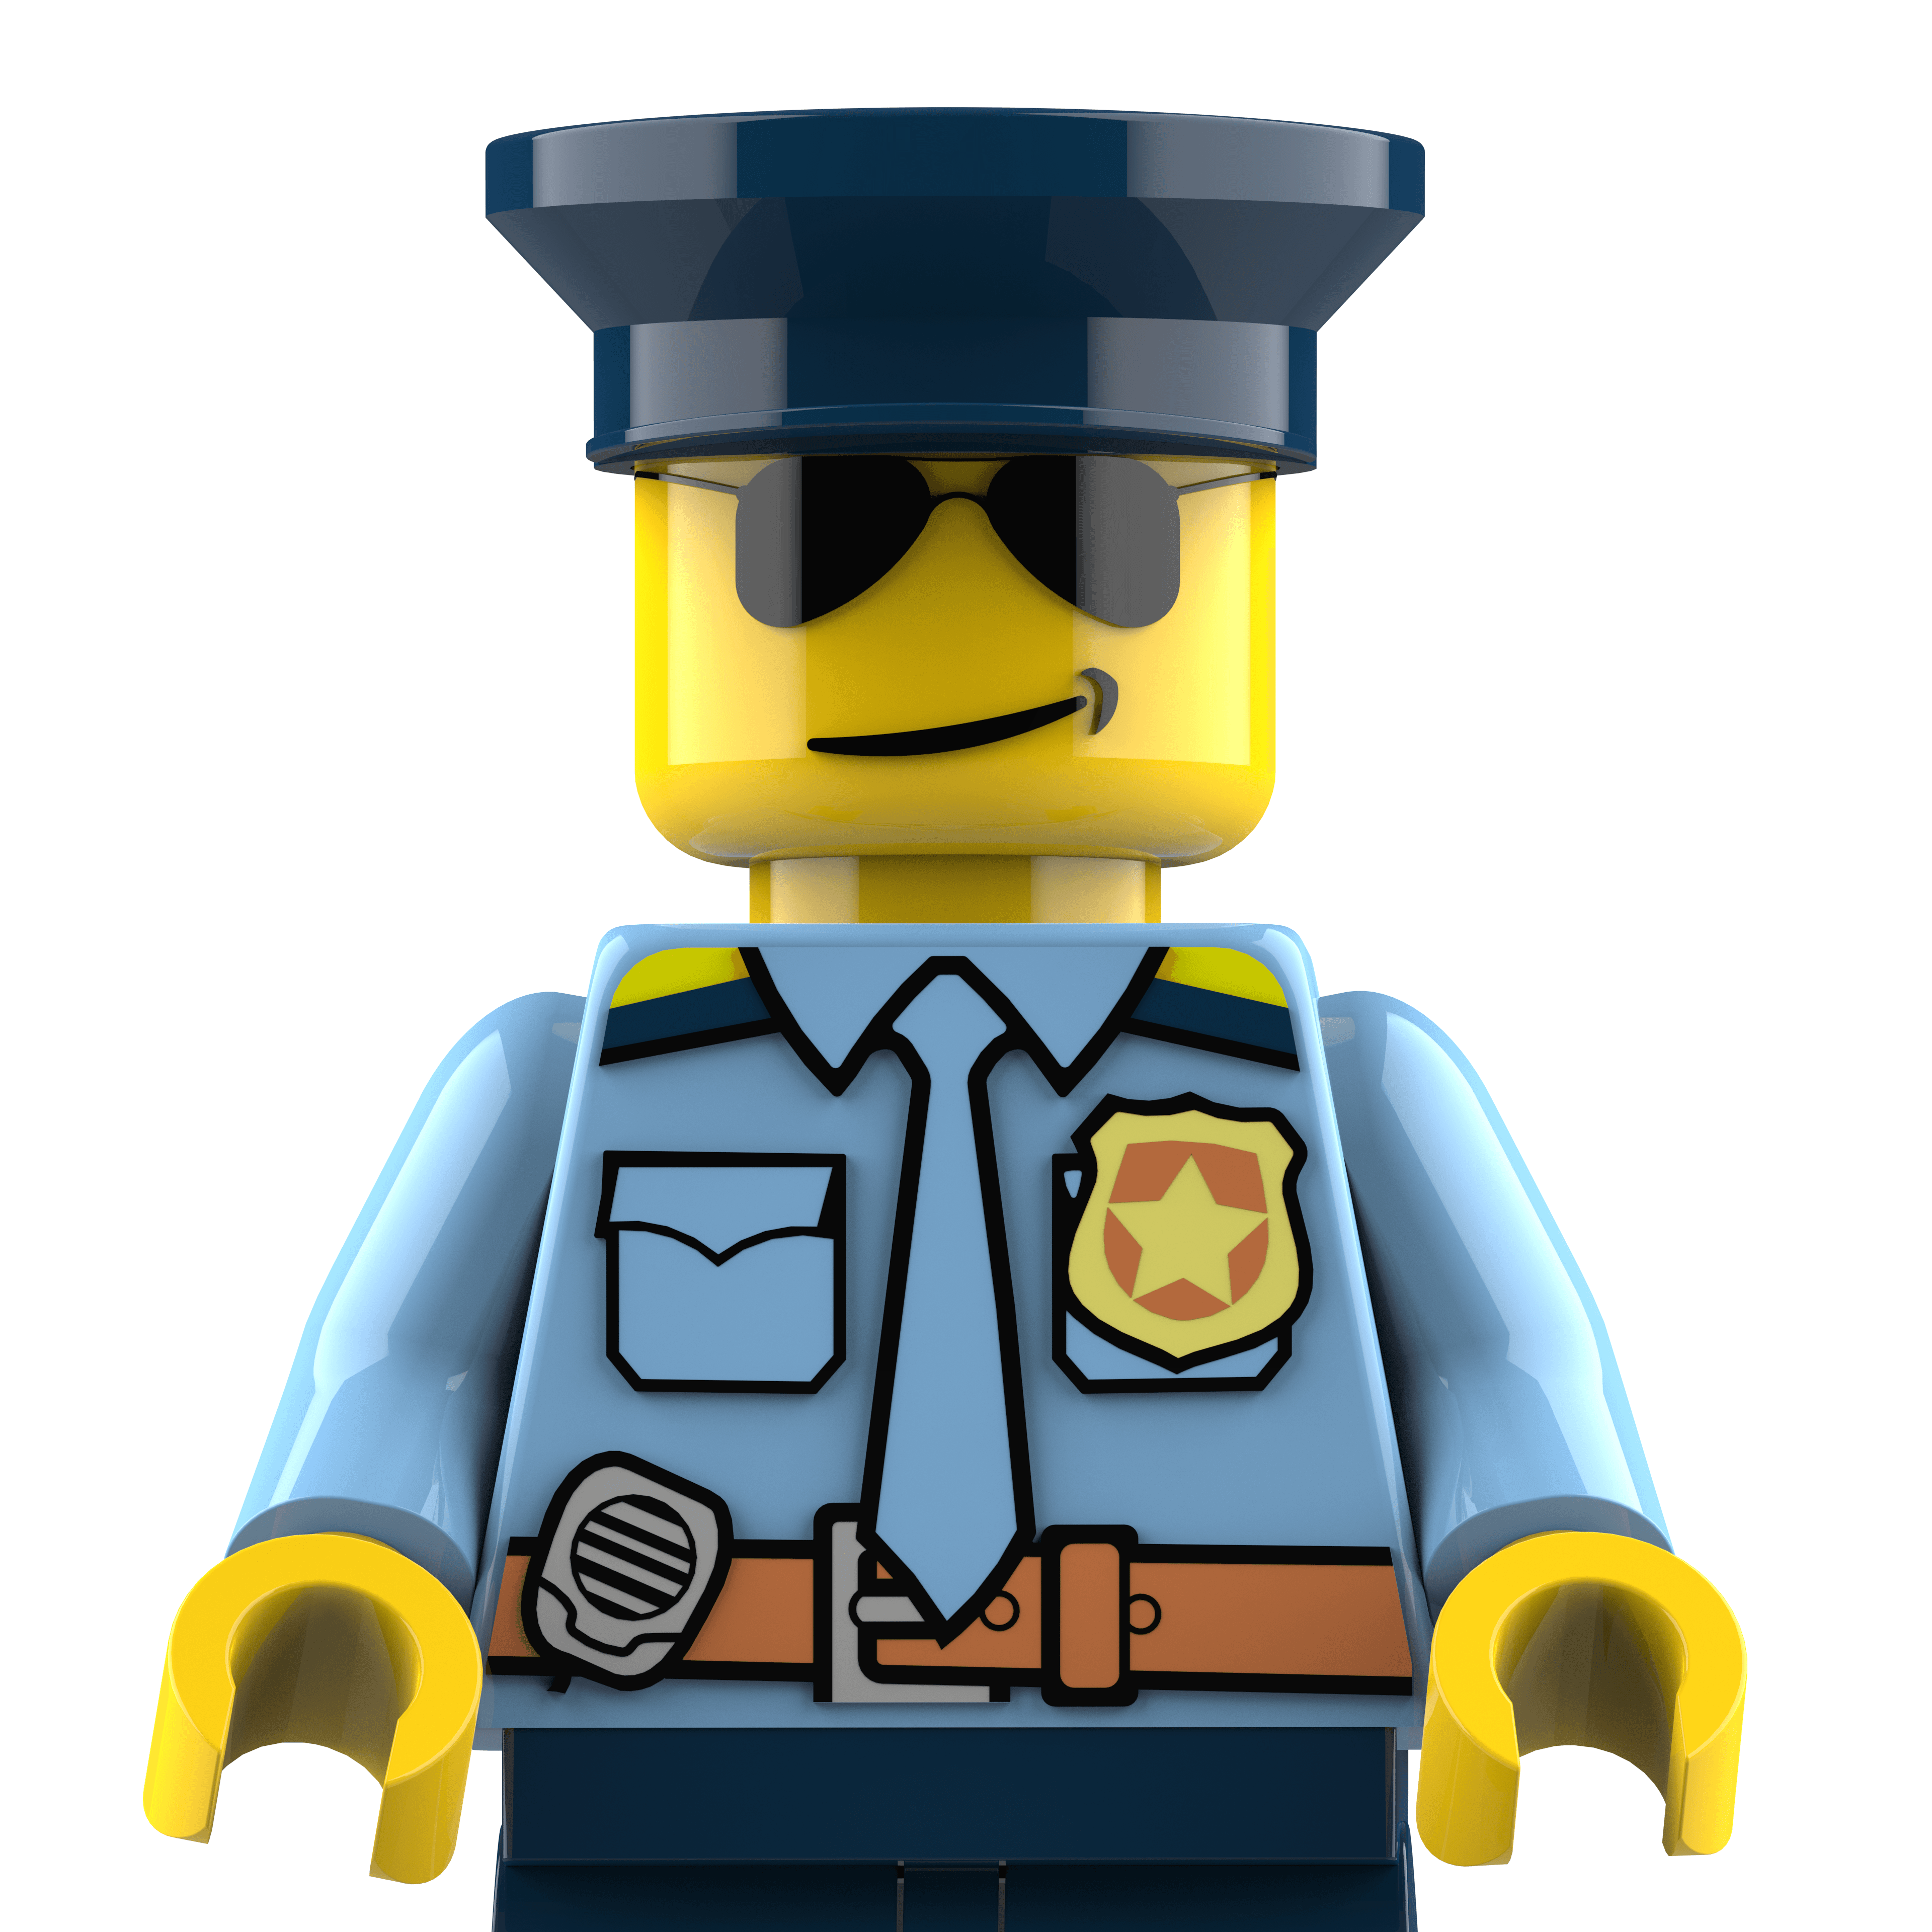 LEGO City Minifigure - Male Police Officer / Policeman, moustache